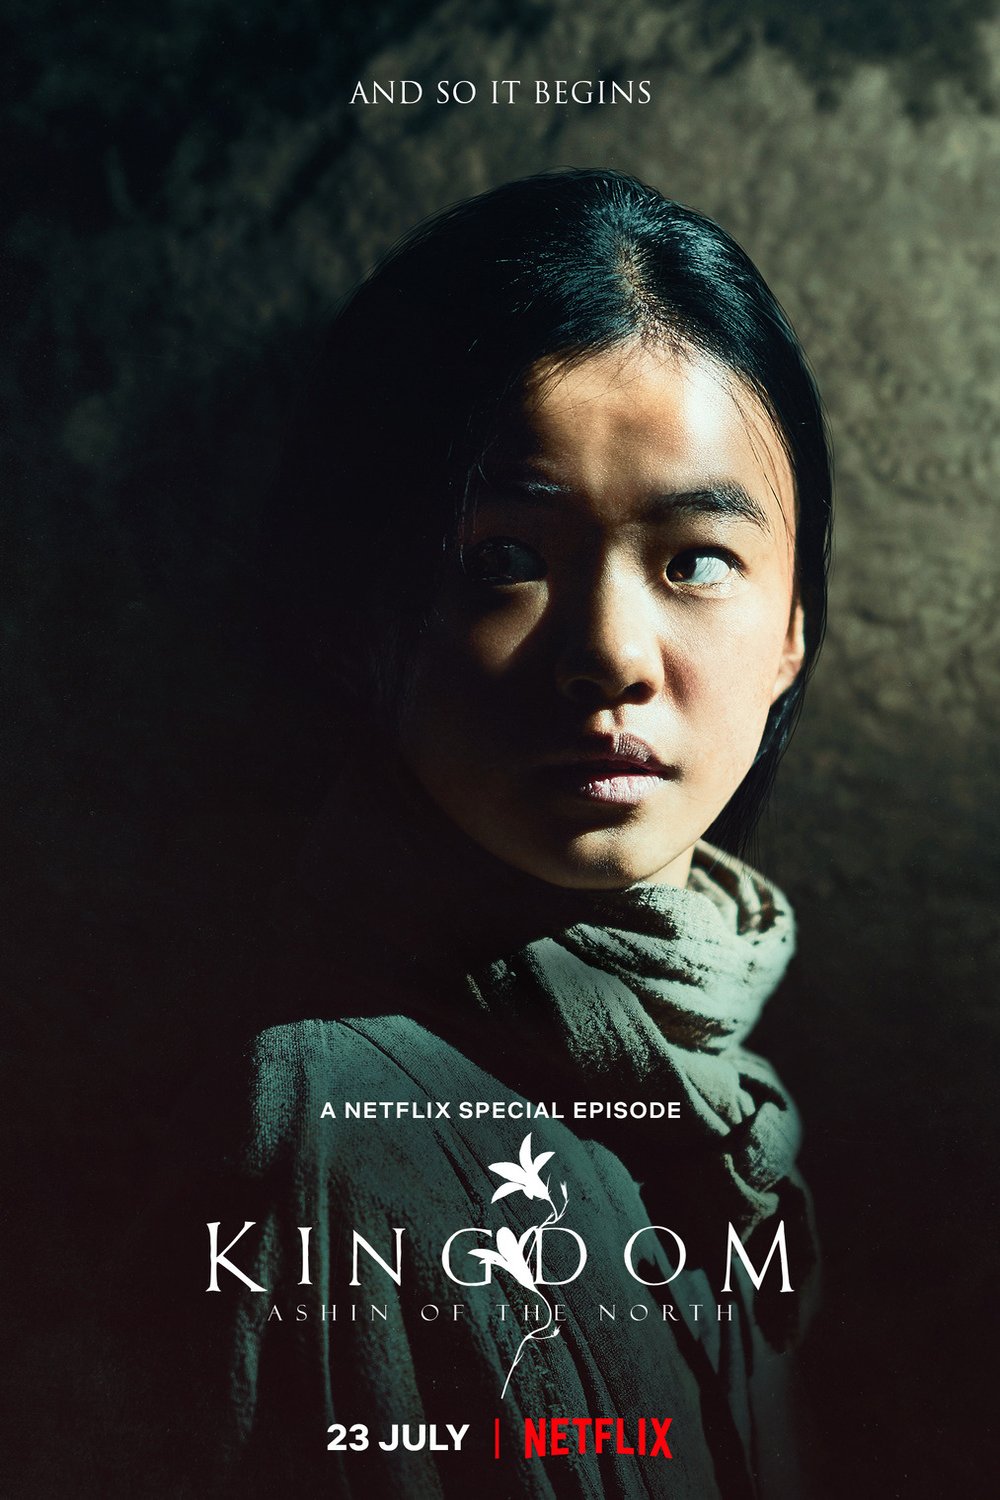 Poster of the movie Kingdom: Ashin of the North